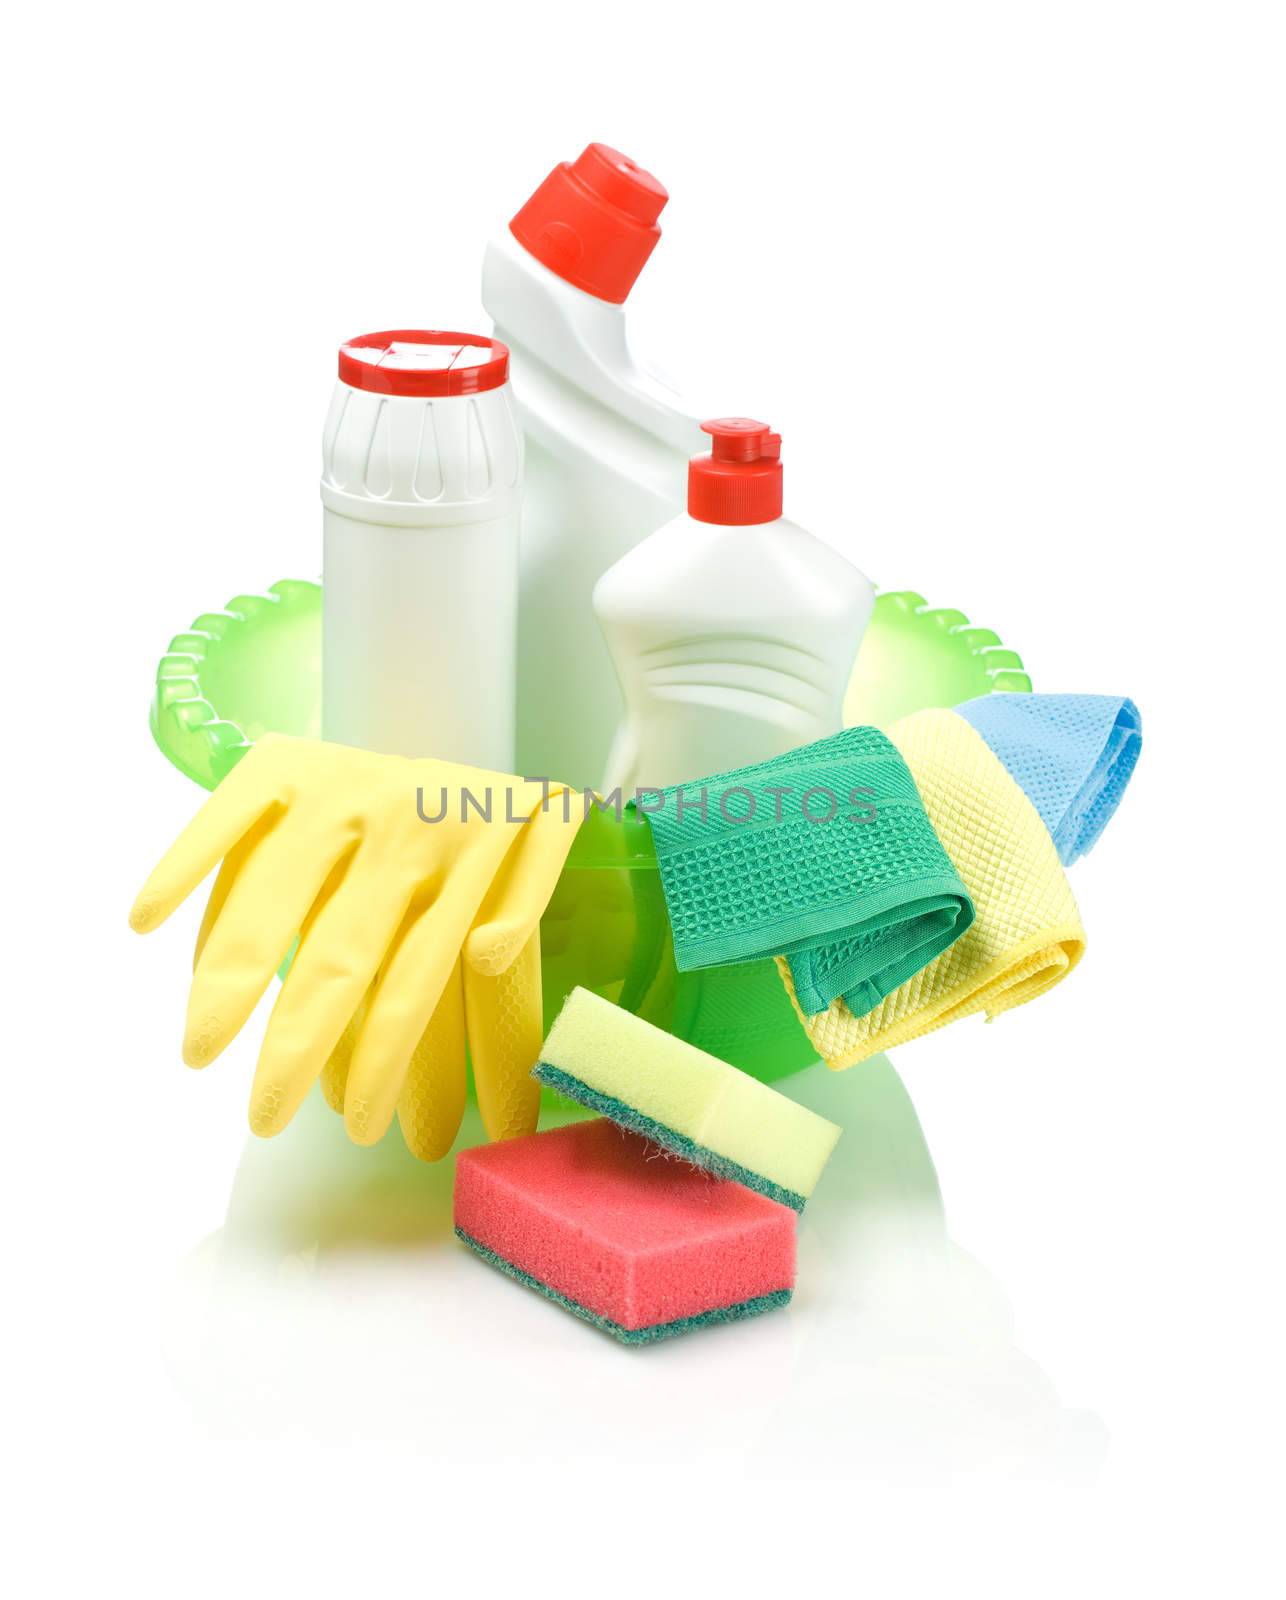 cleaning supplies by mihalec